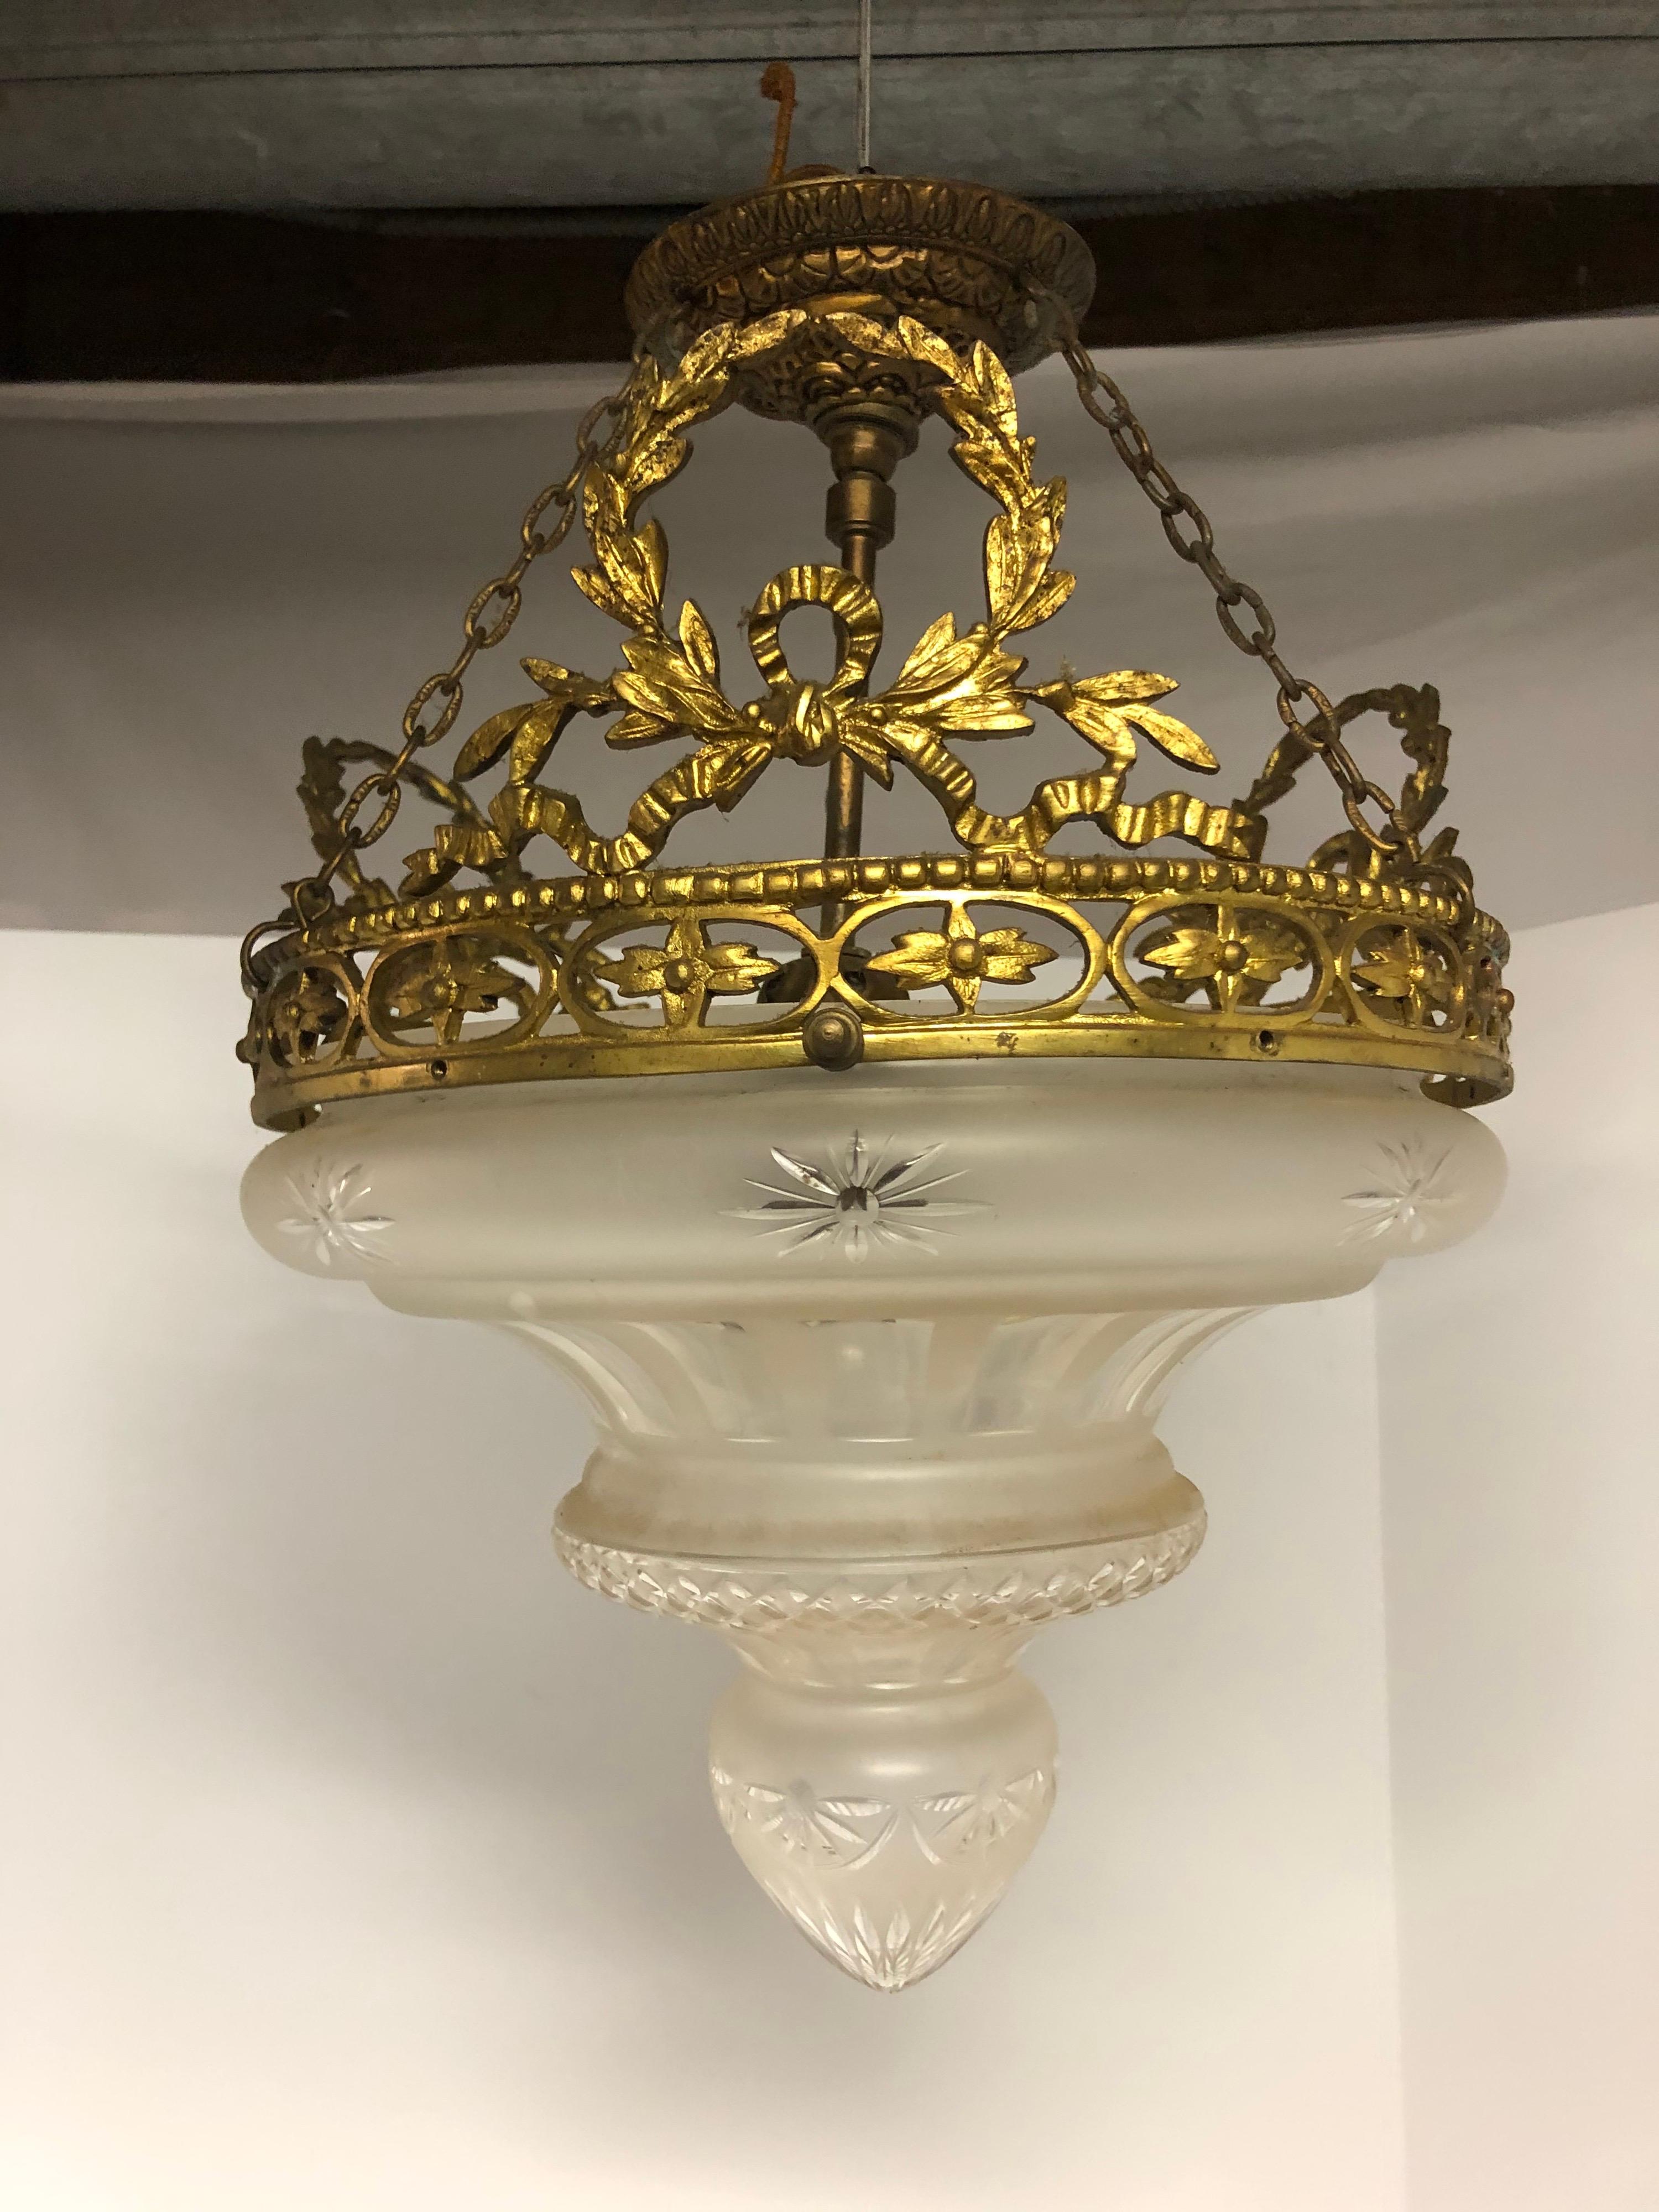 Gilt bronze and cut glass chandelier. Few chips on inside of lip on glass that can not be seen at all when hanging, no cracks. Glass is in very good condition. Chandelier is very impressive when hung. Single socket. Amazing glass!